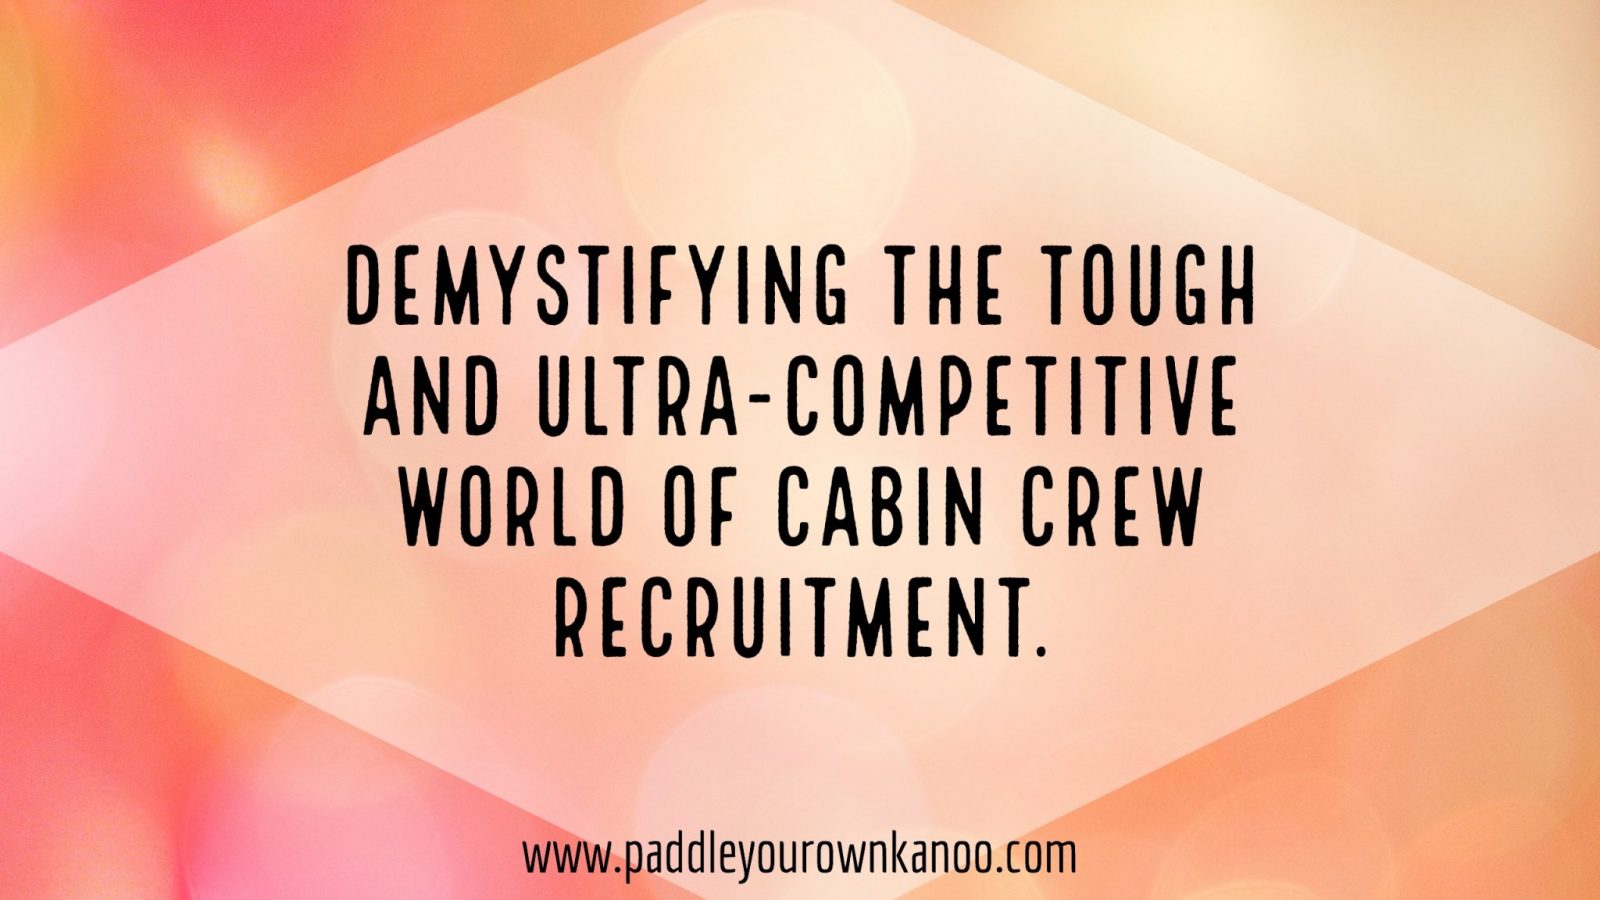 Demystifying the tough and ultra-competitive world of cabin crew recruitment